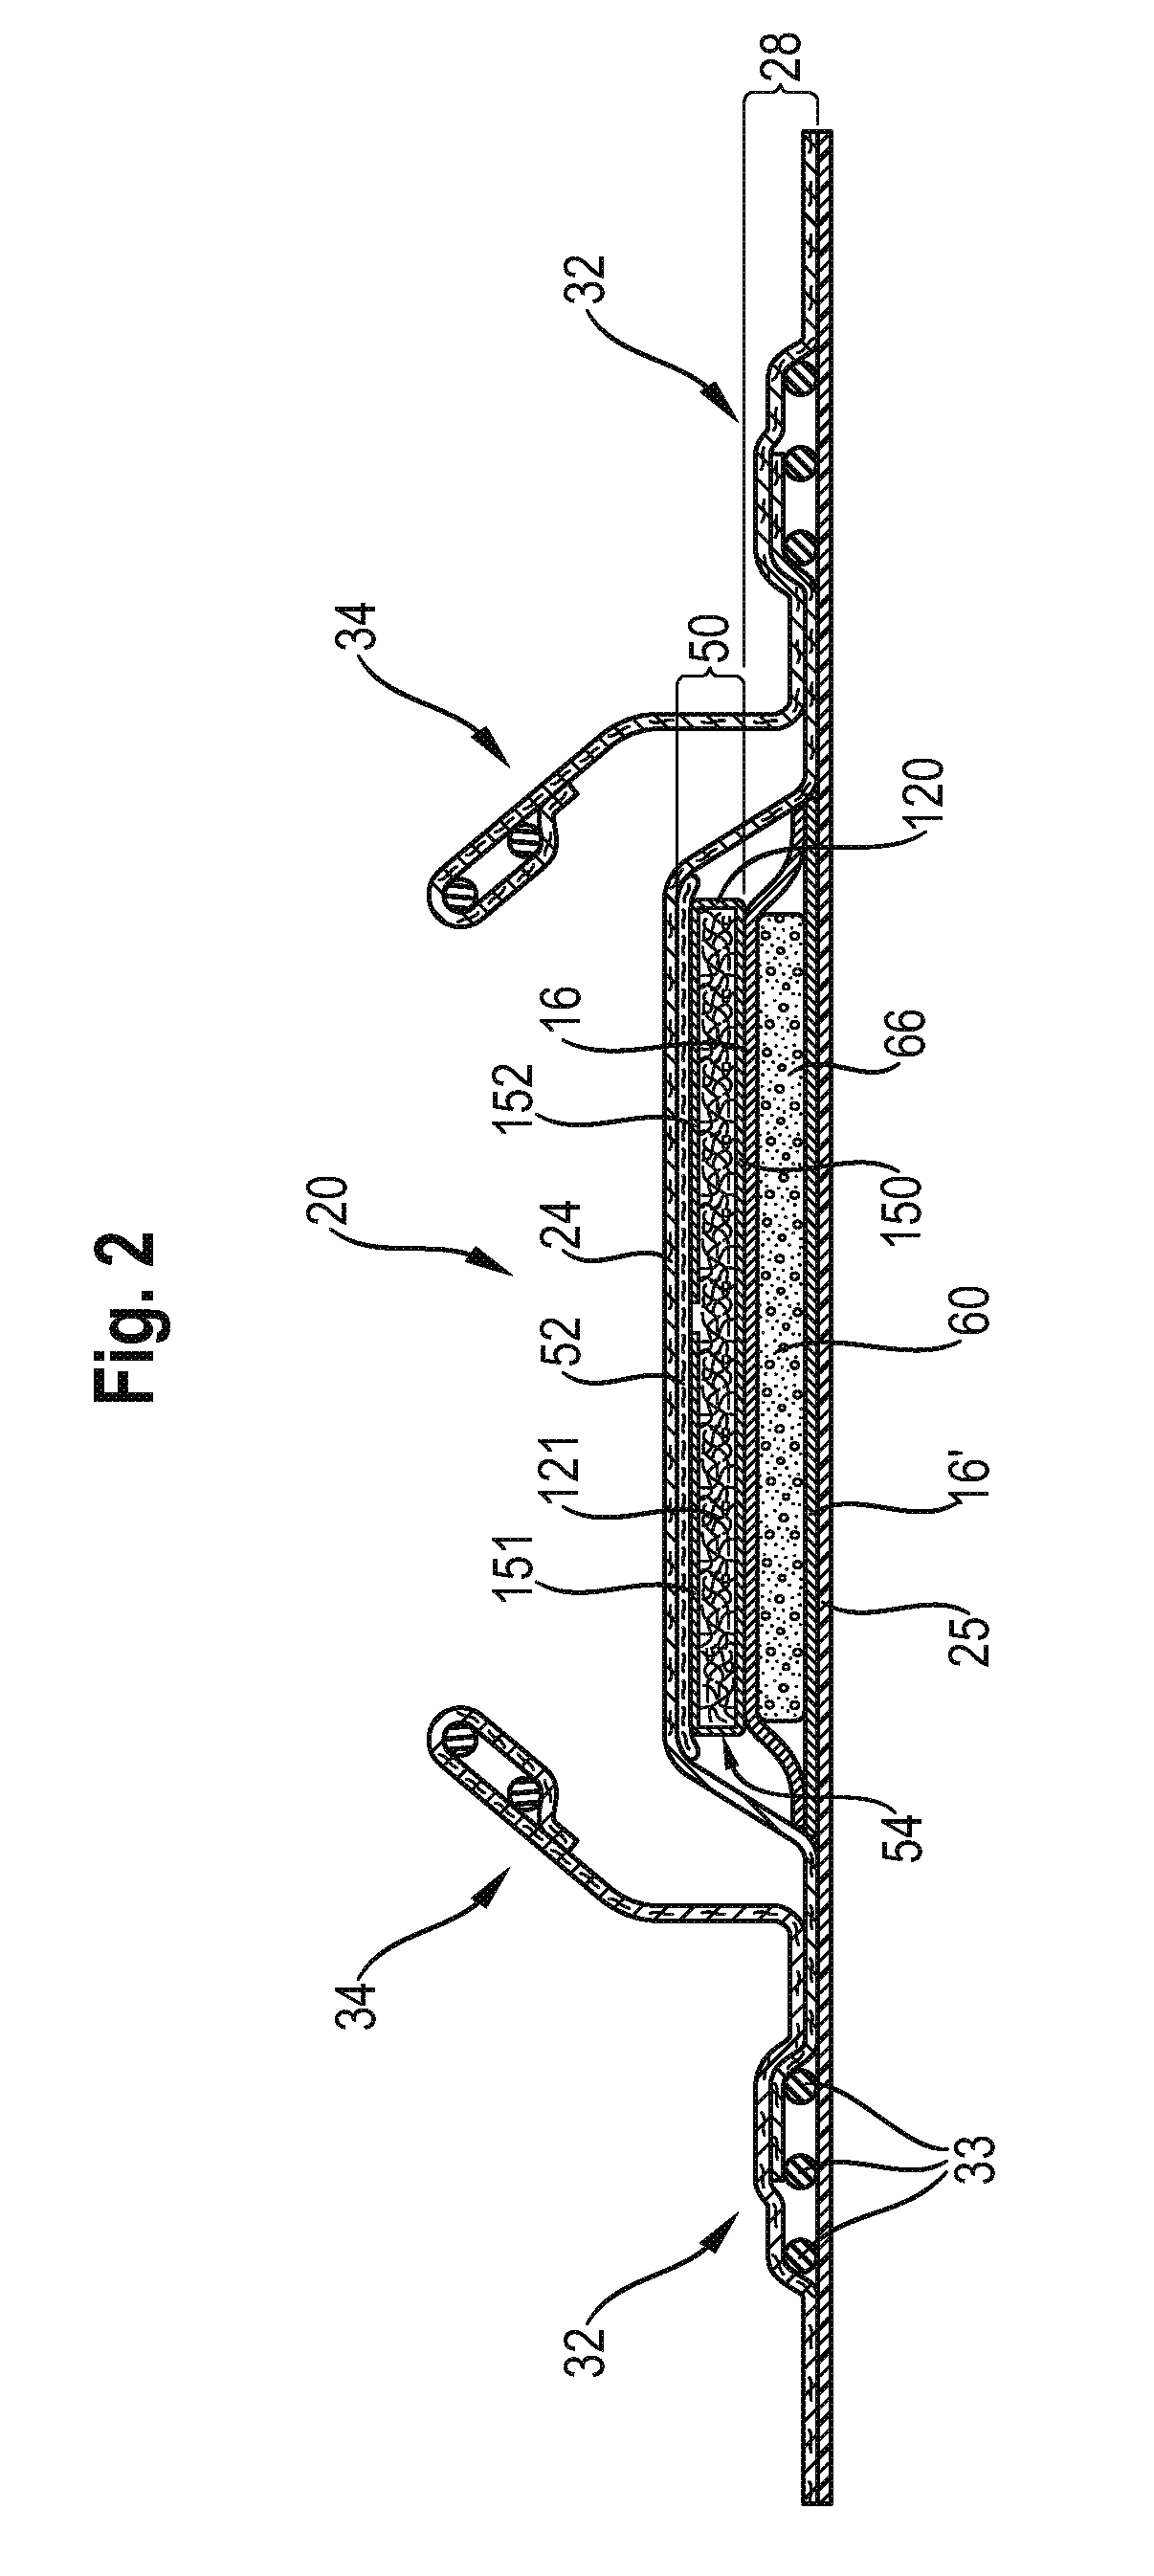 Absorbent articles with distribution system